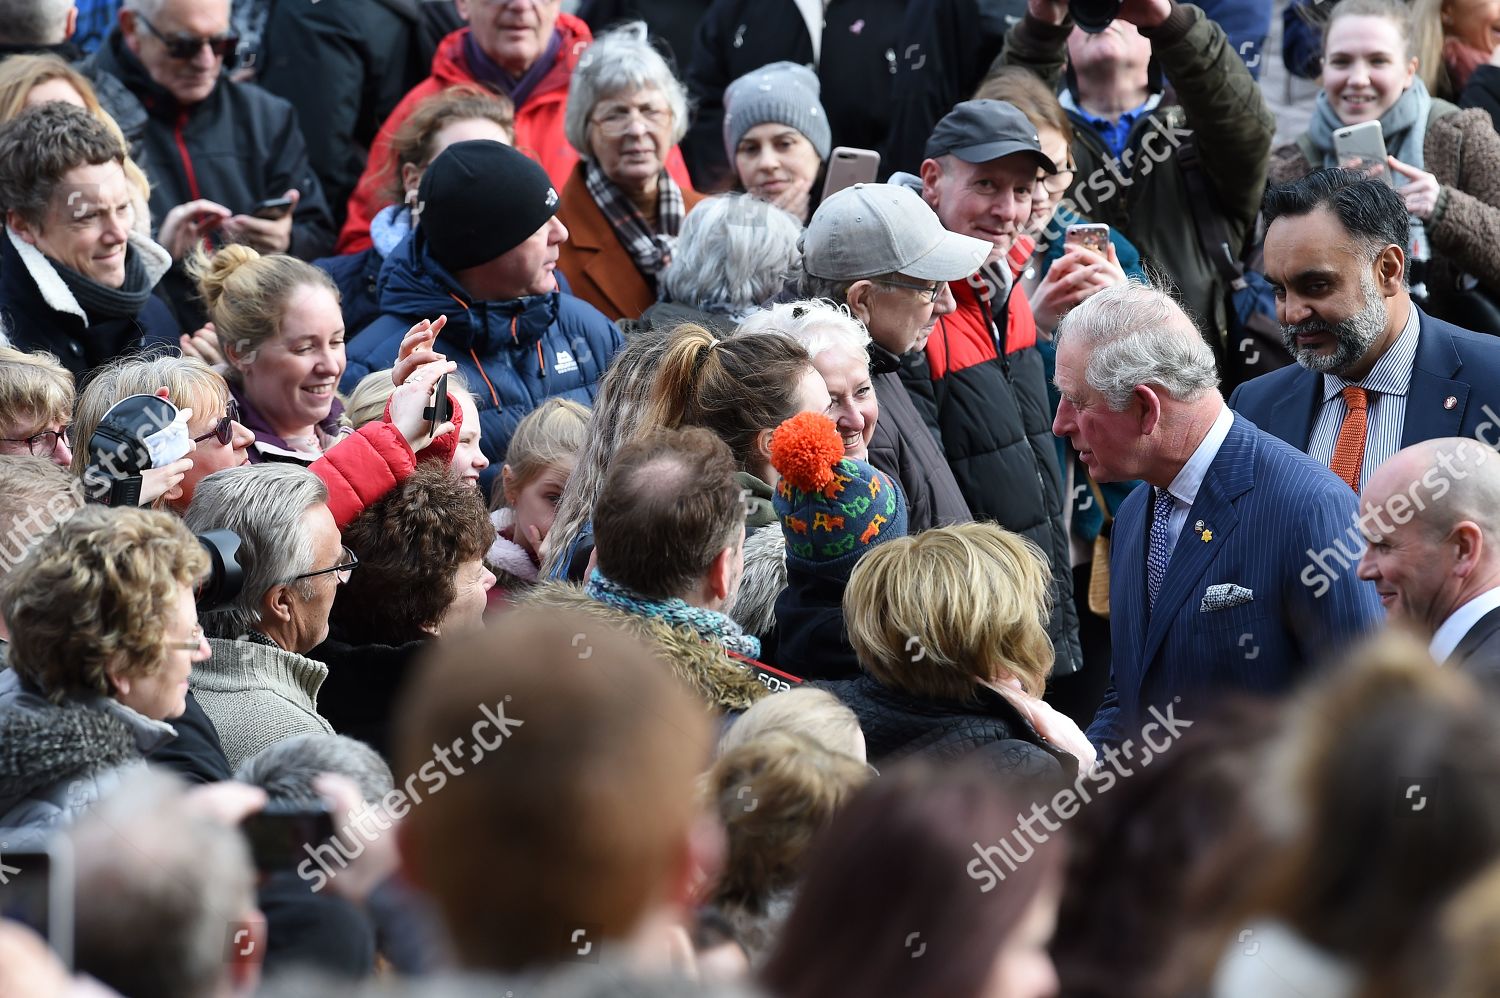 prince-charles-and-camilla-duchess-of-cornwall-visit-to-liverpool-uk-shutterstock-editorial-10102726e.jpg